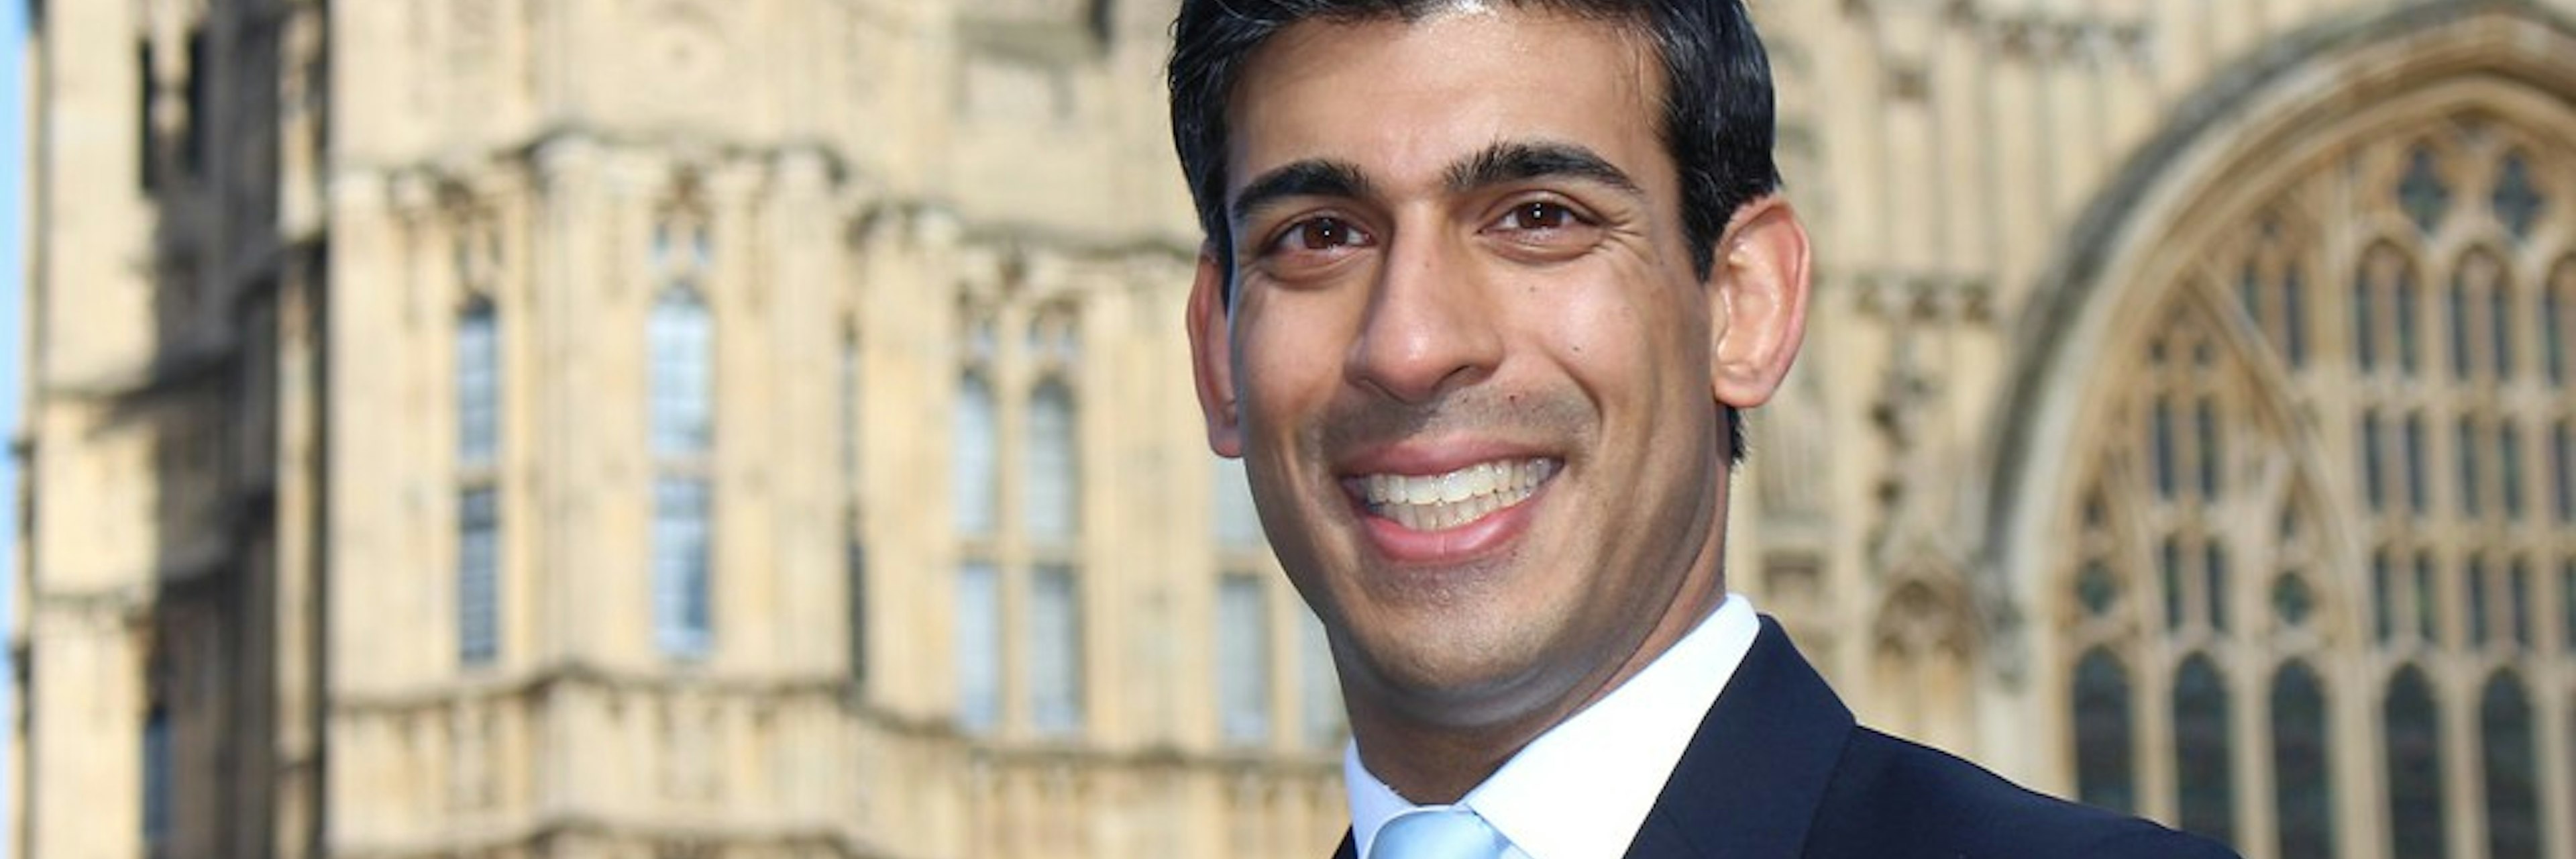 Picture of Rishi Sunak, the former UK chancellor and candidate for prime minsiter